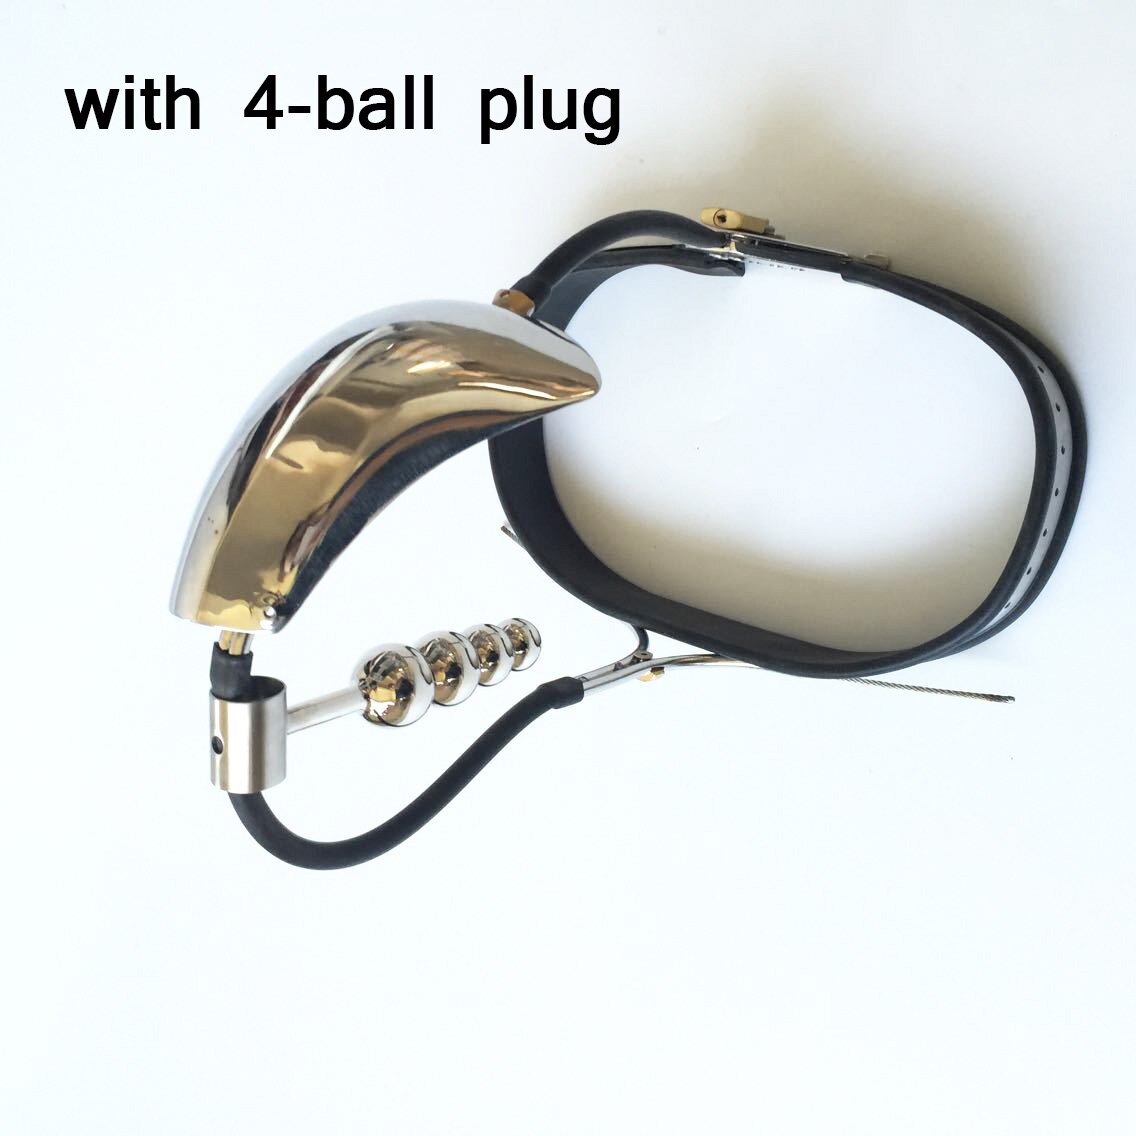 Metal Chastity Belt For Men - Male Panties Shield Device with Lock and Anal Plug - KeepMeLocked